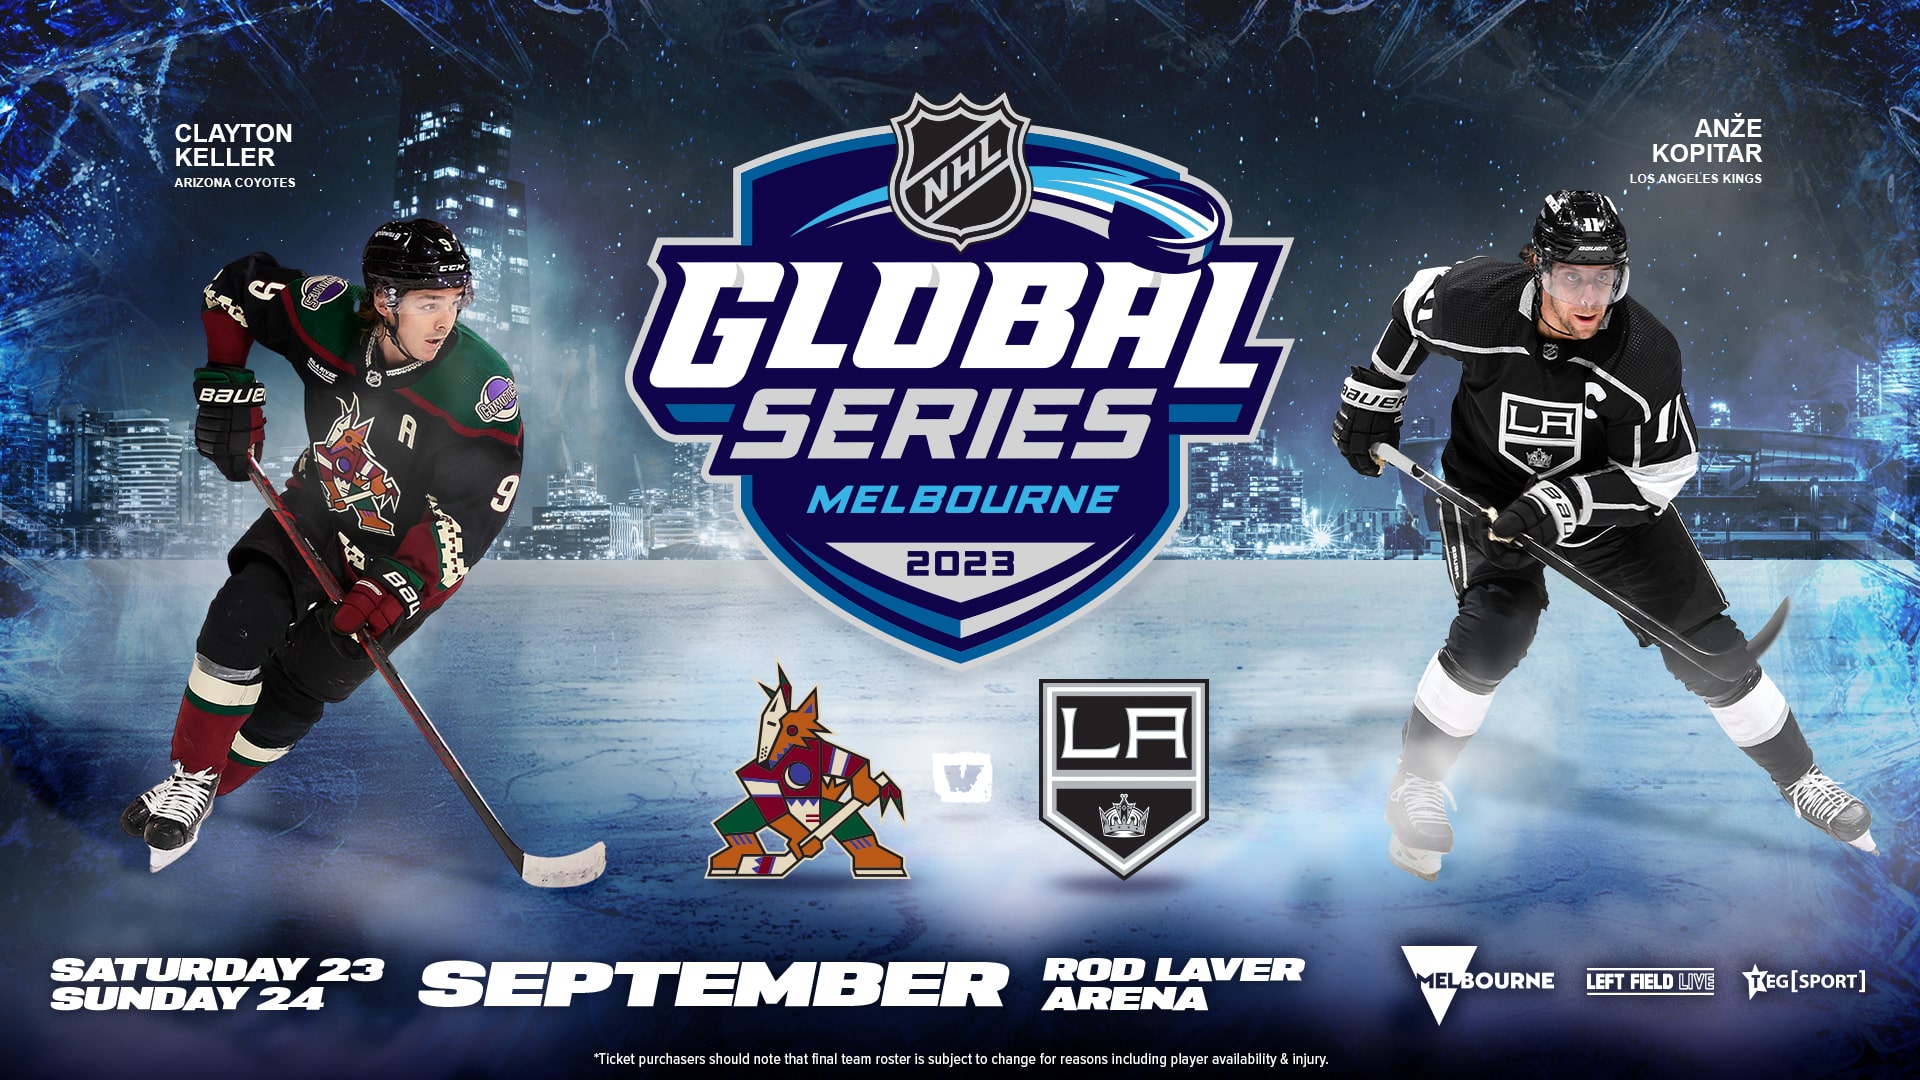 Melbourne to host first-ever National Hockey League games in the Southern Hemisphere